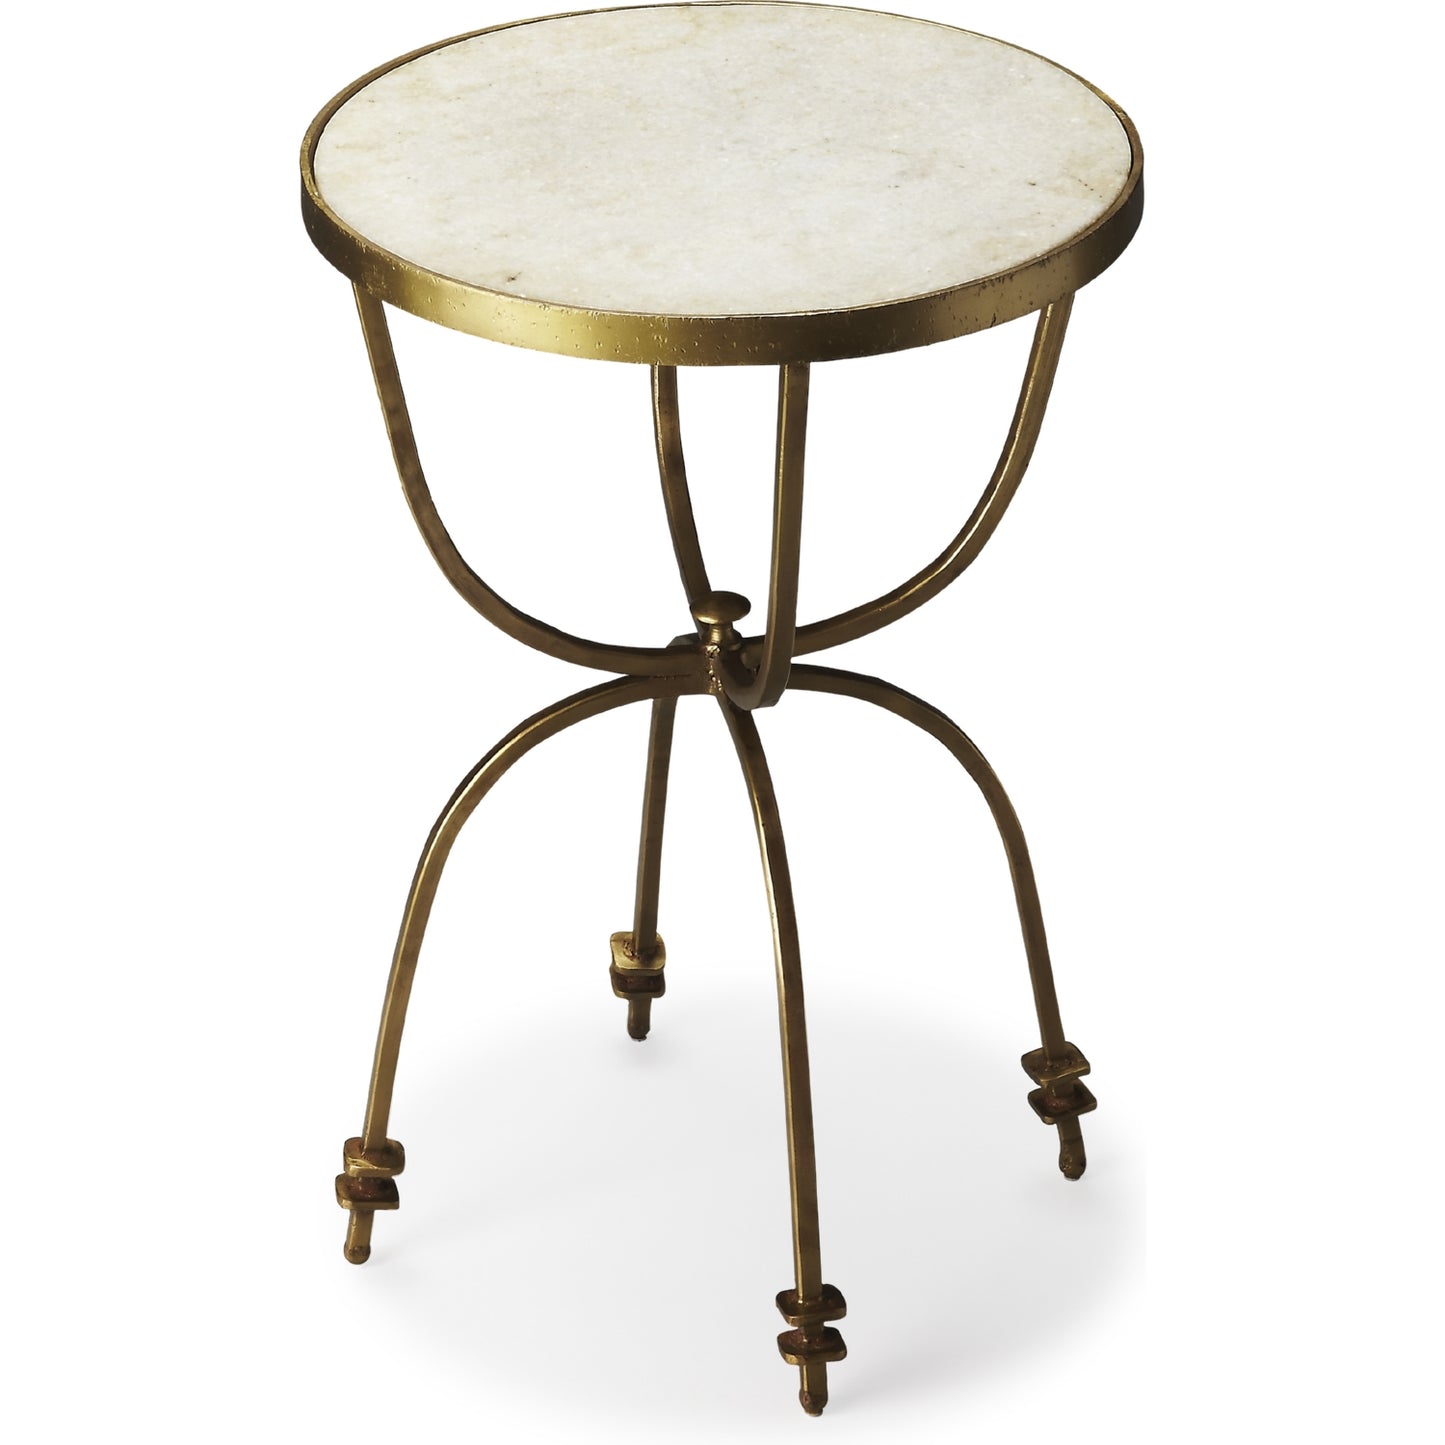 ROUND WHITE MARBLE AND GOLD SIDE TABLE